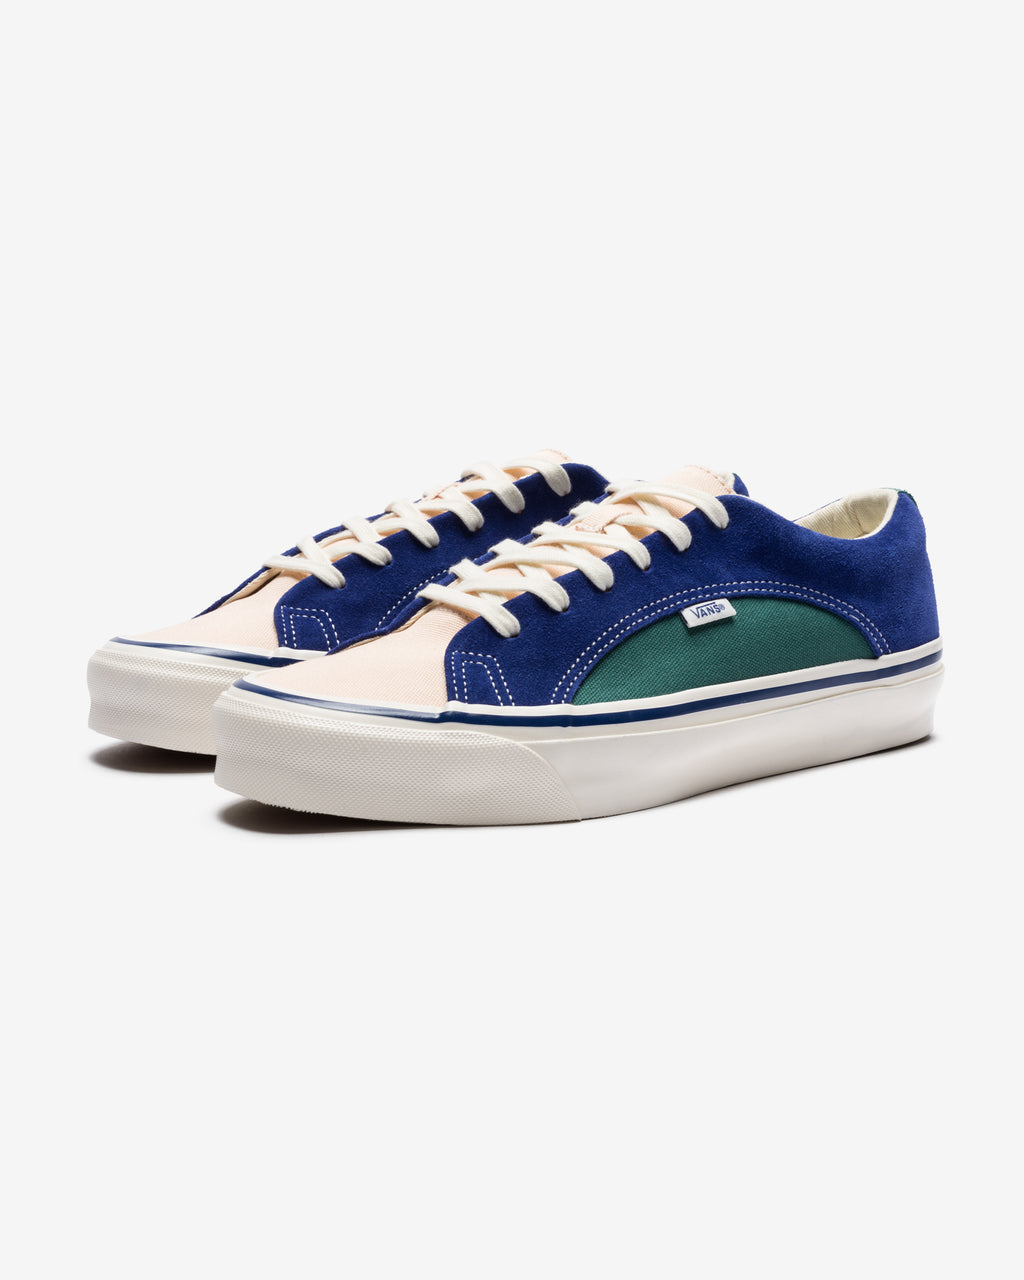 green and blue vans